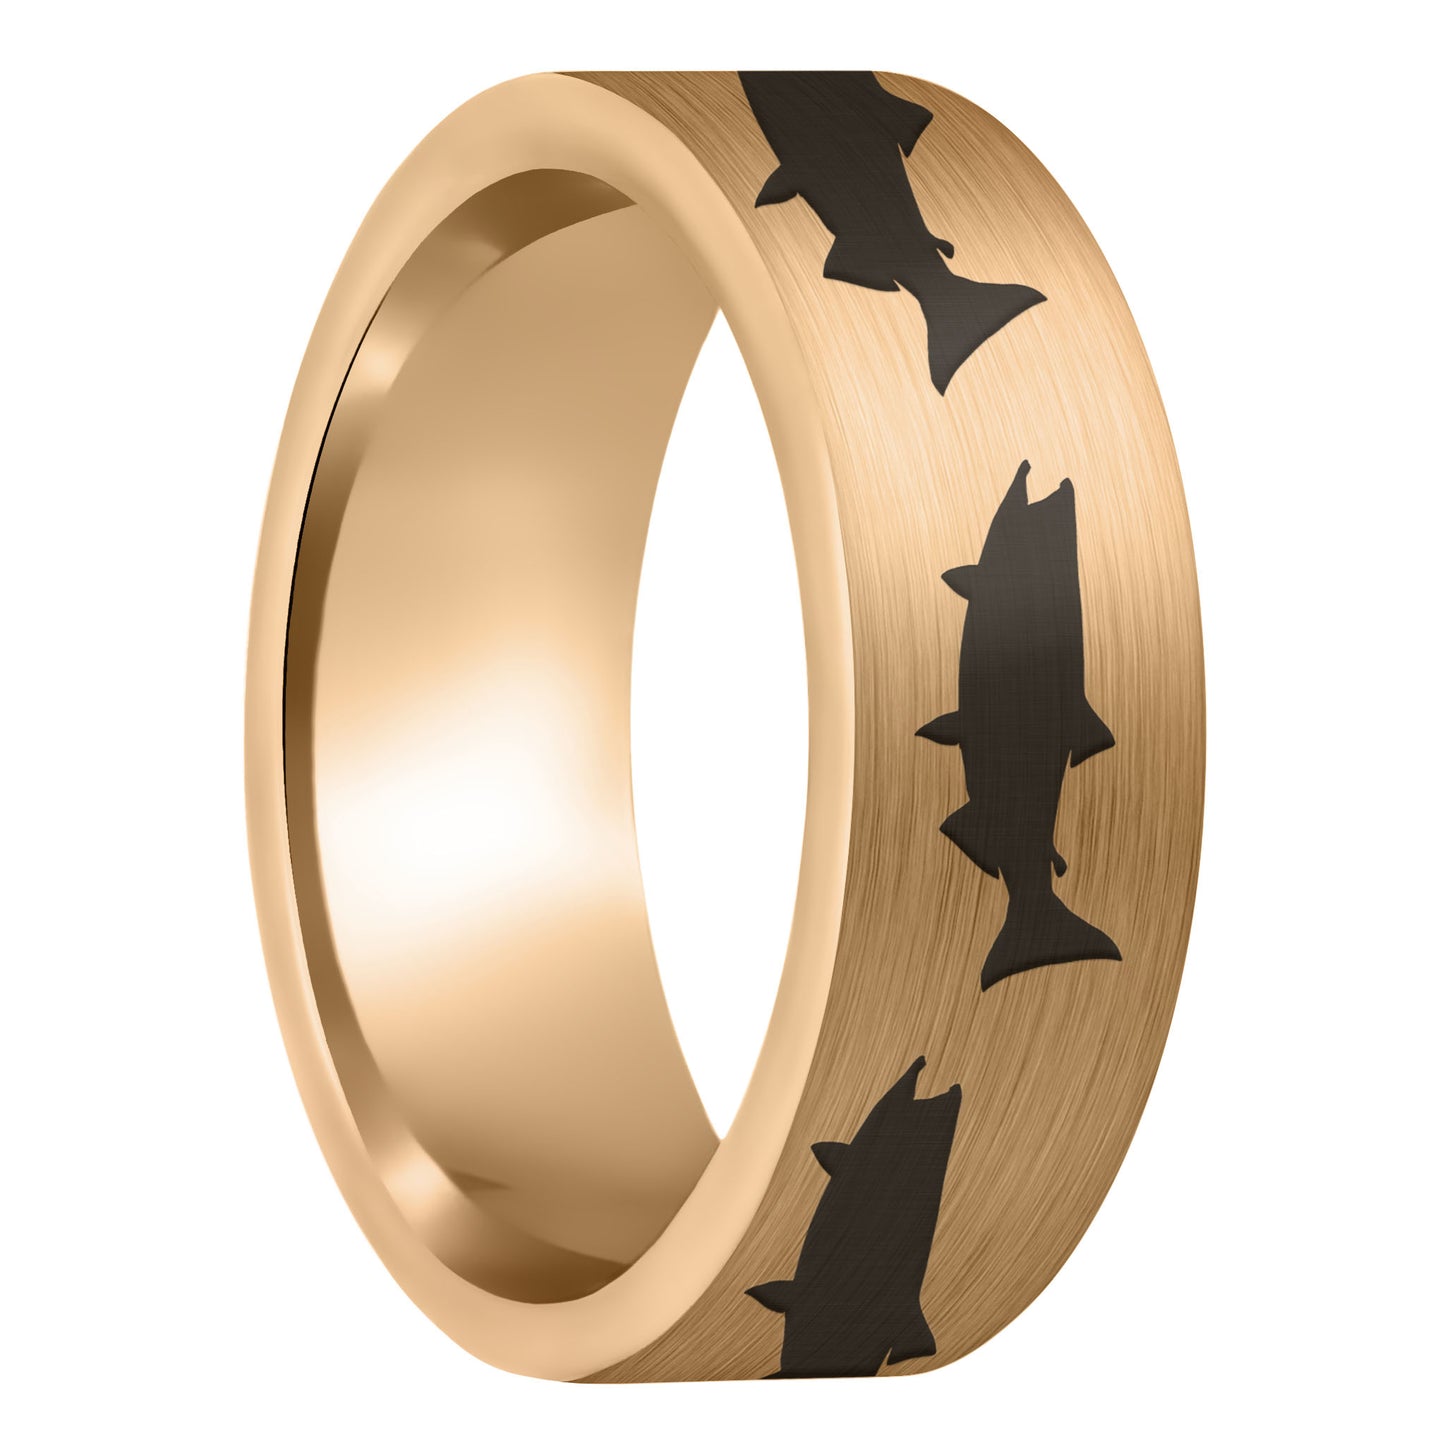 A salmon fish brushed rose gold tungsten men's wedding band displayed on a plain white background.